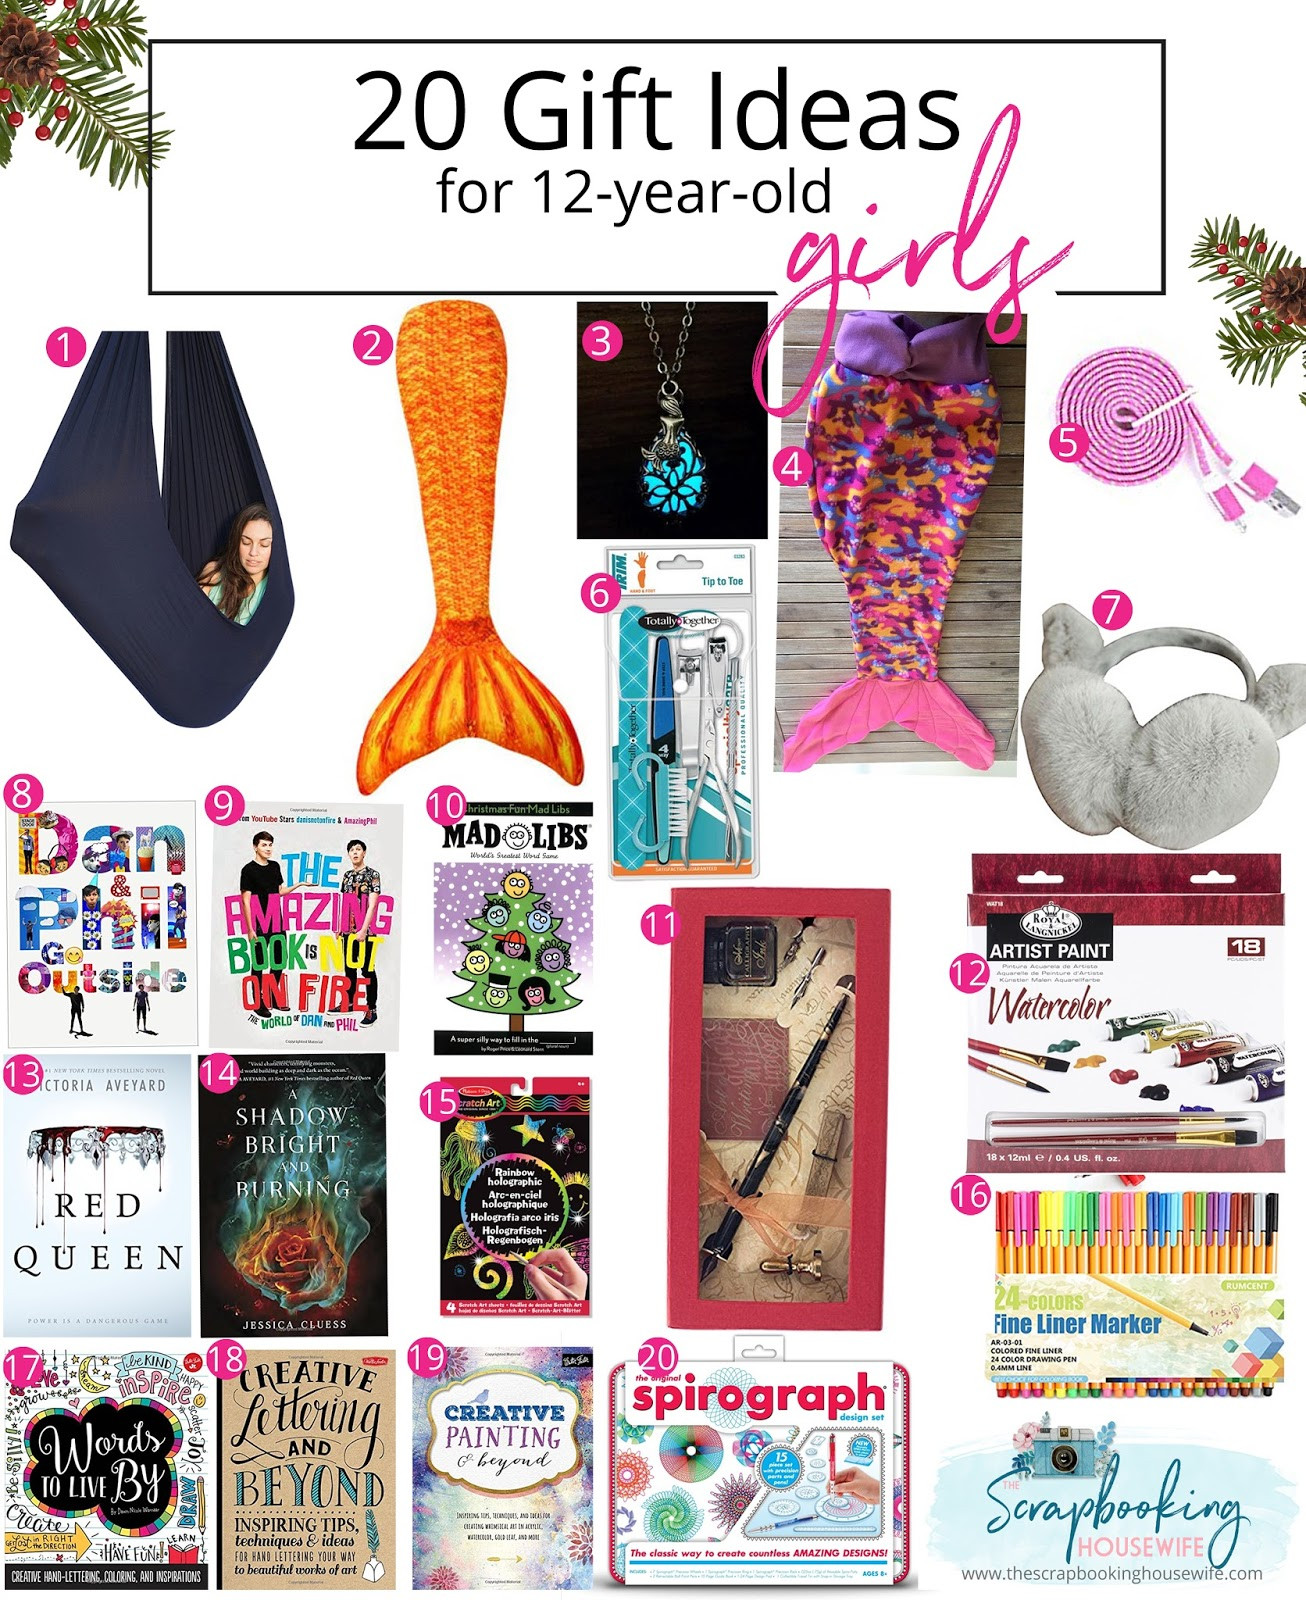 Good Gift Ideas For 12 Year Old Girls
 Ellabella Designs 13 GIFT IDEAS FOR TODDLERS